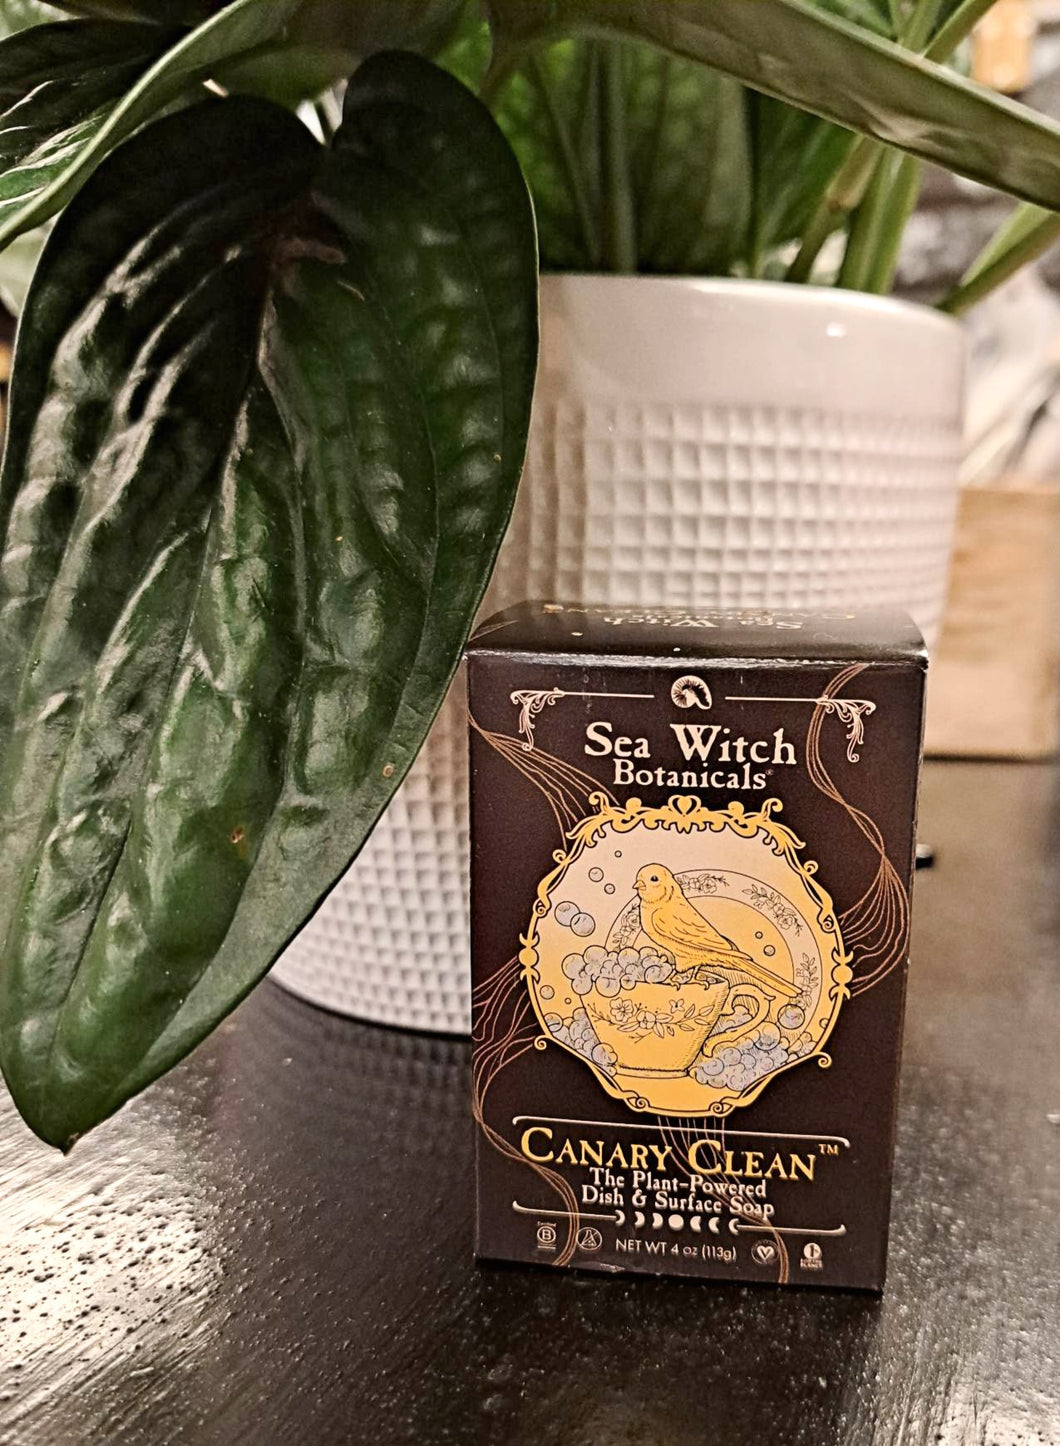 Sea Witch Botanicals Canary Clean The Plant - Powered Dish and Surface Soap